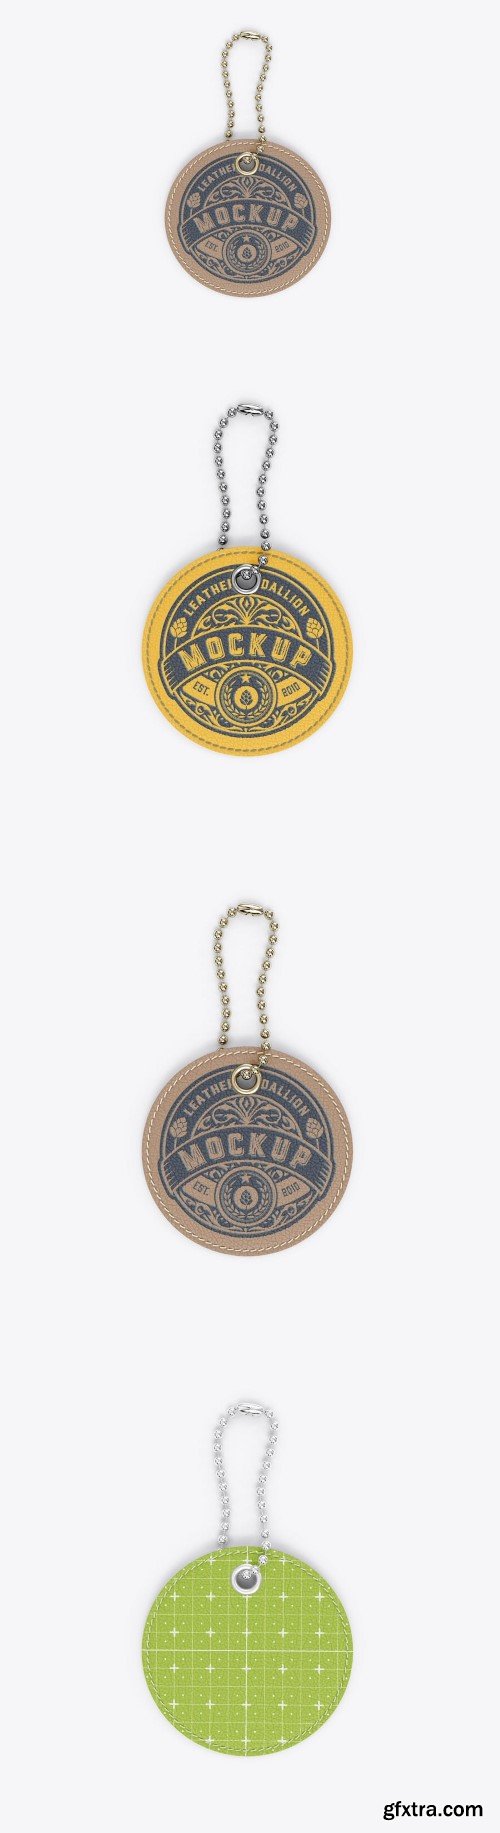 Leather medallion With Metallic Chain Mockup